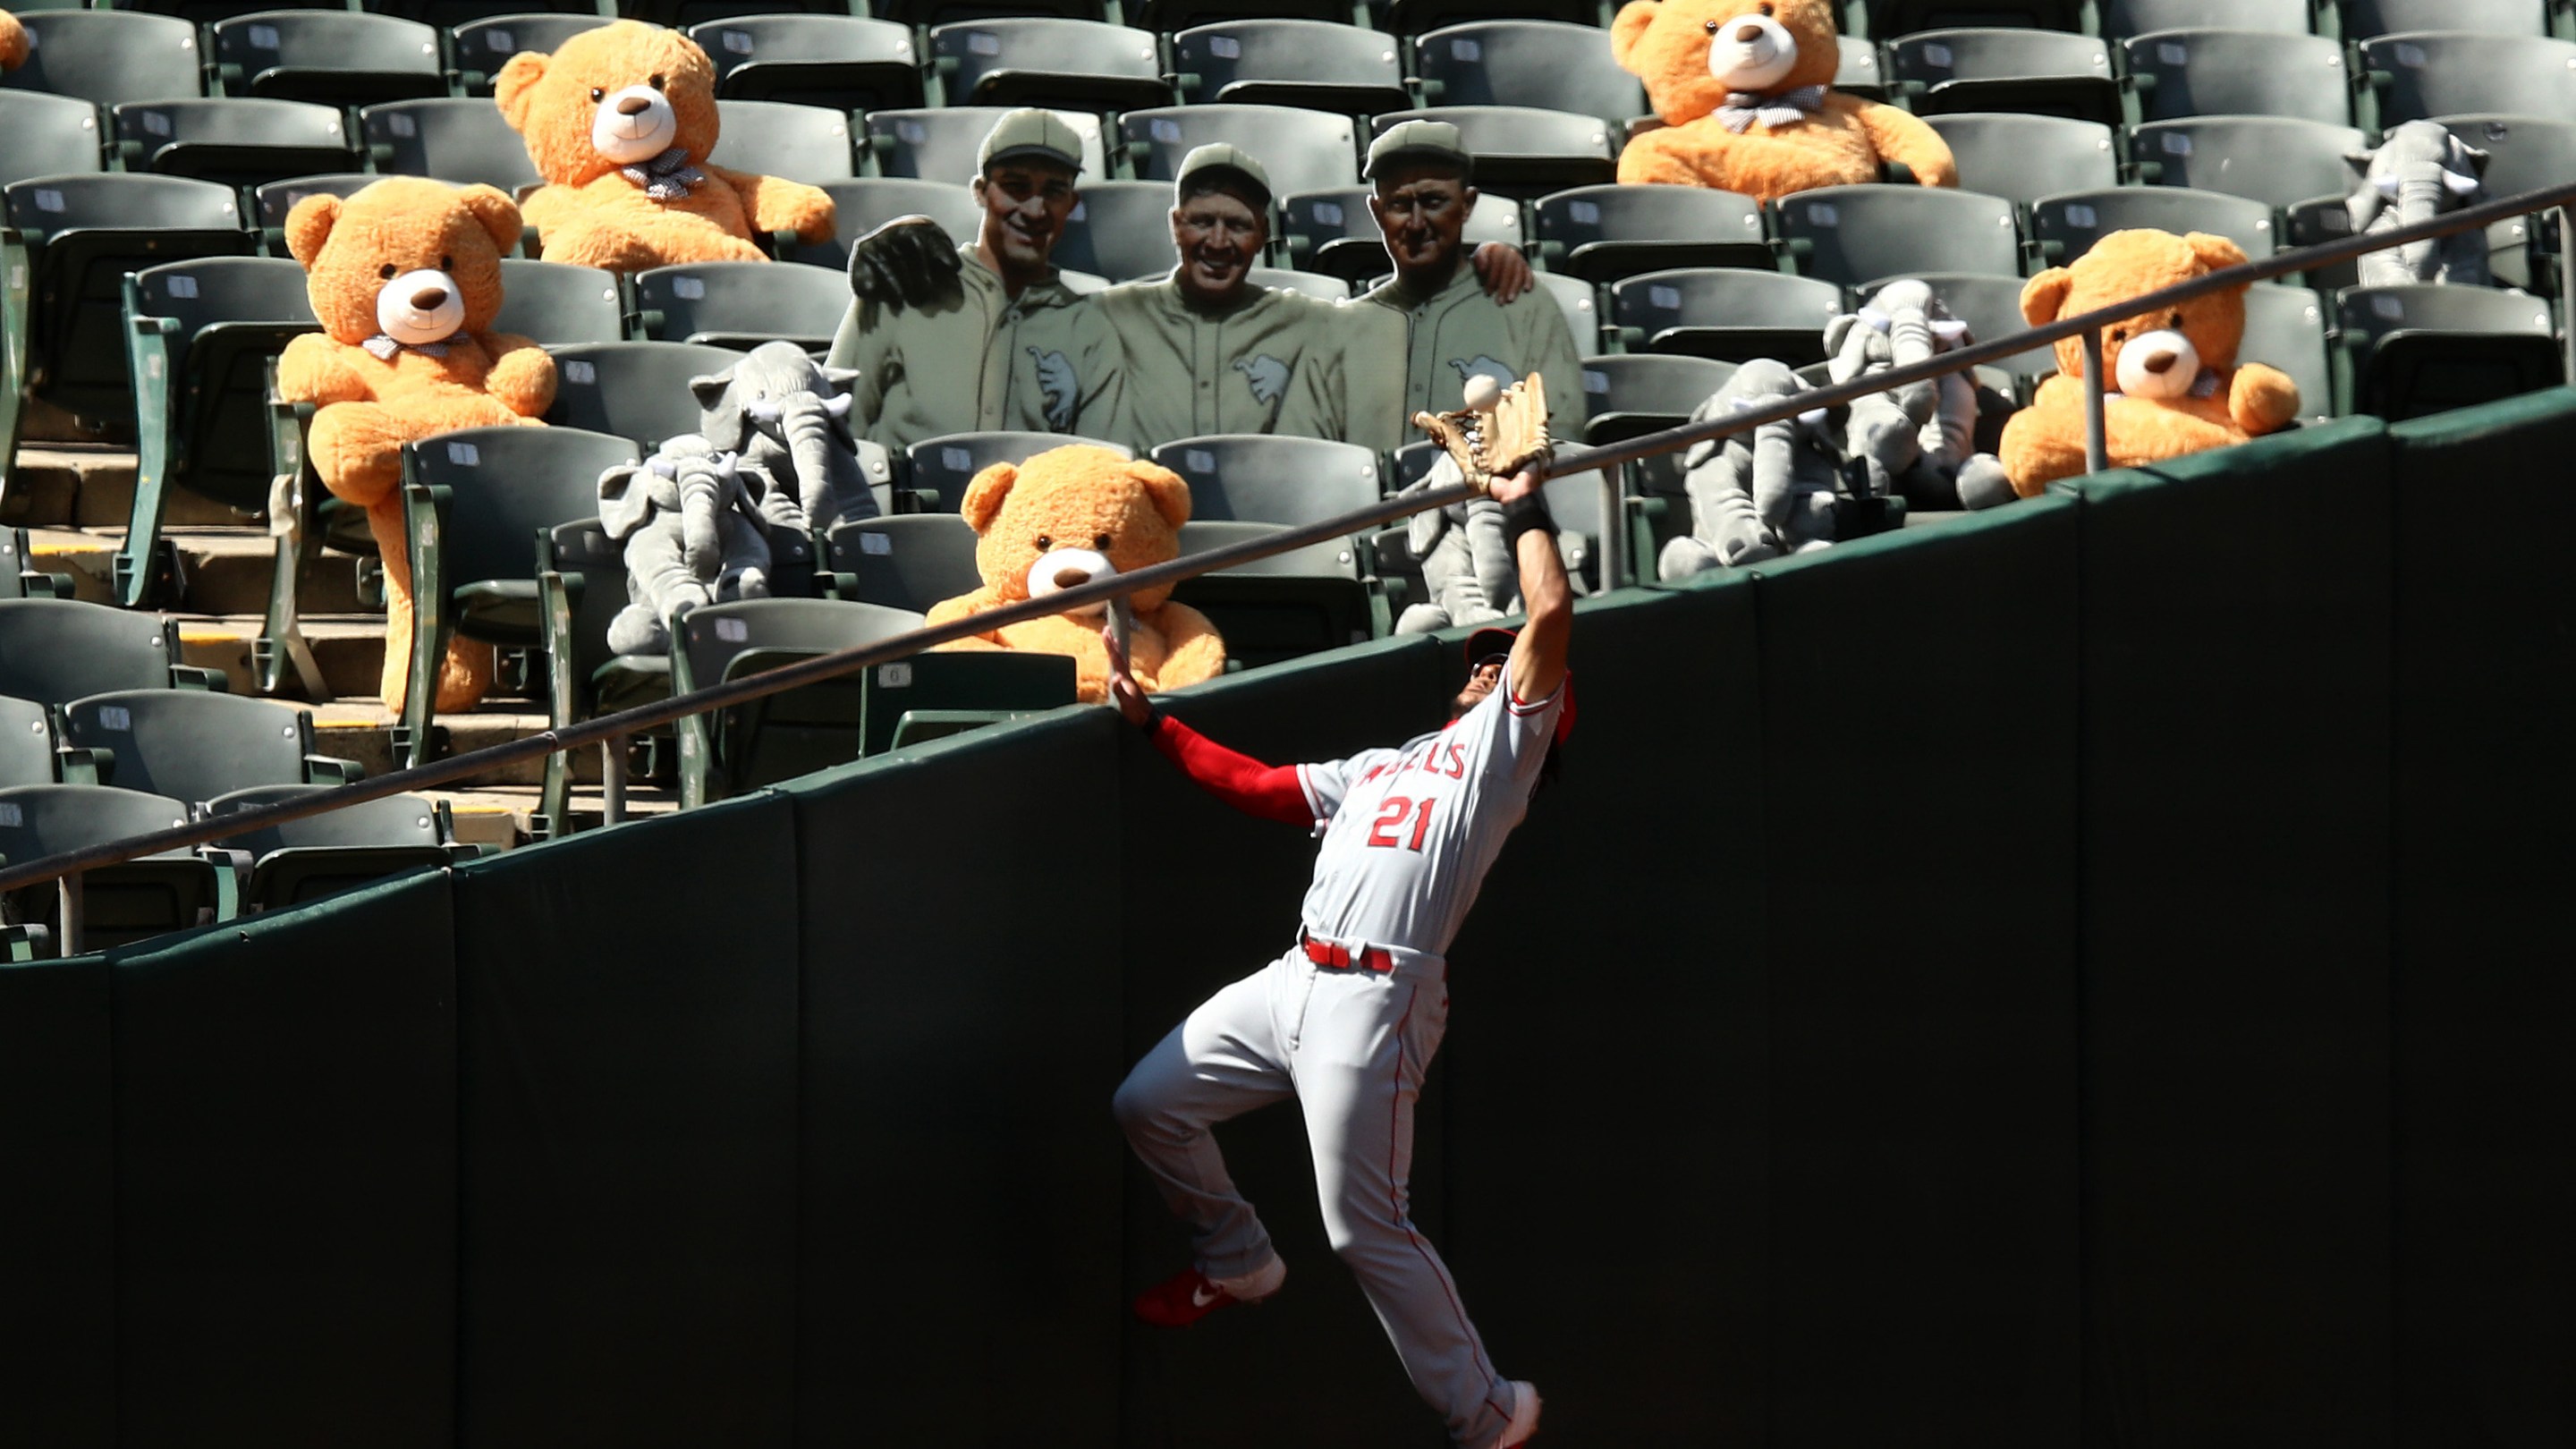 Michael Hermosillo of the Angels makes a catch in foul territory during the 2020 MLB season, while a bunch of creepy stuffed teddy bears look on.